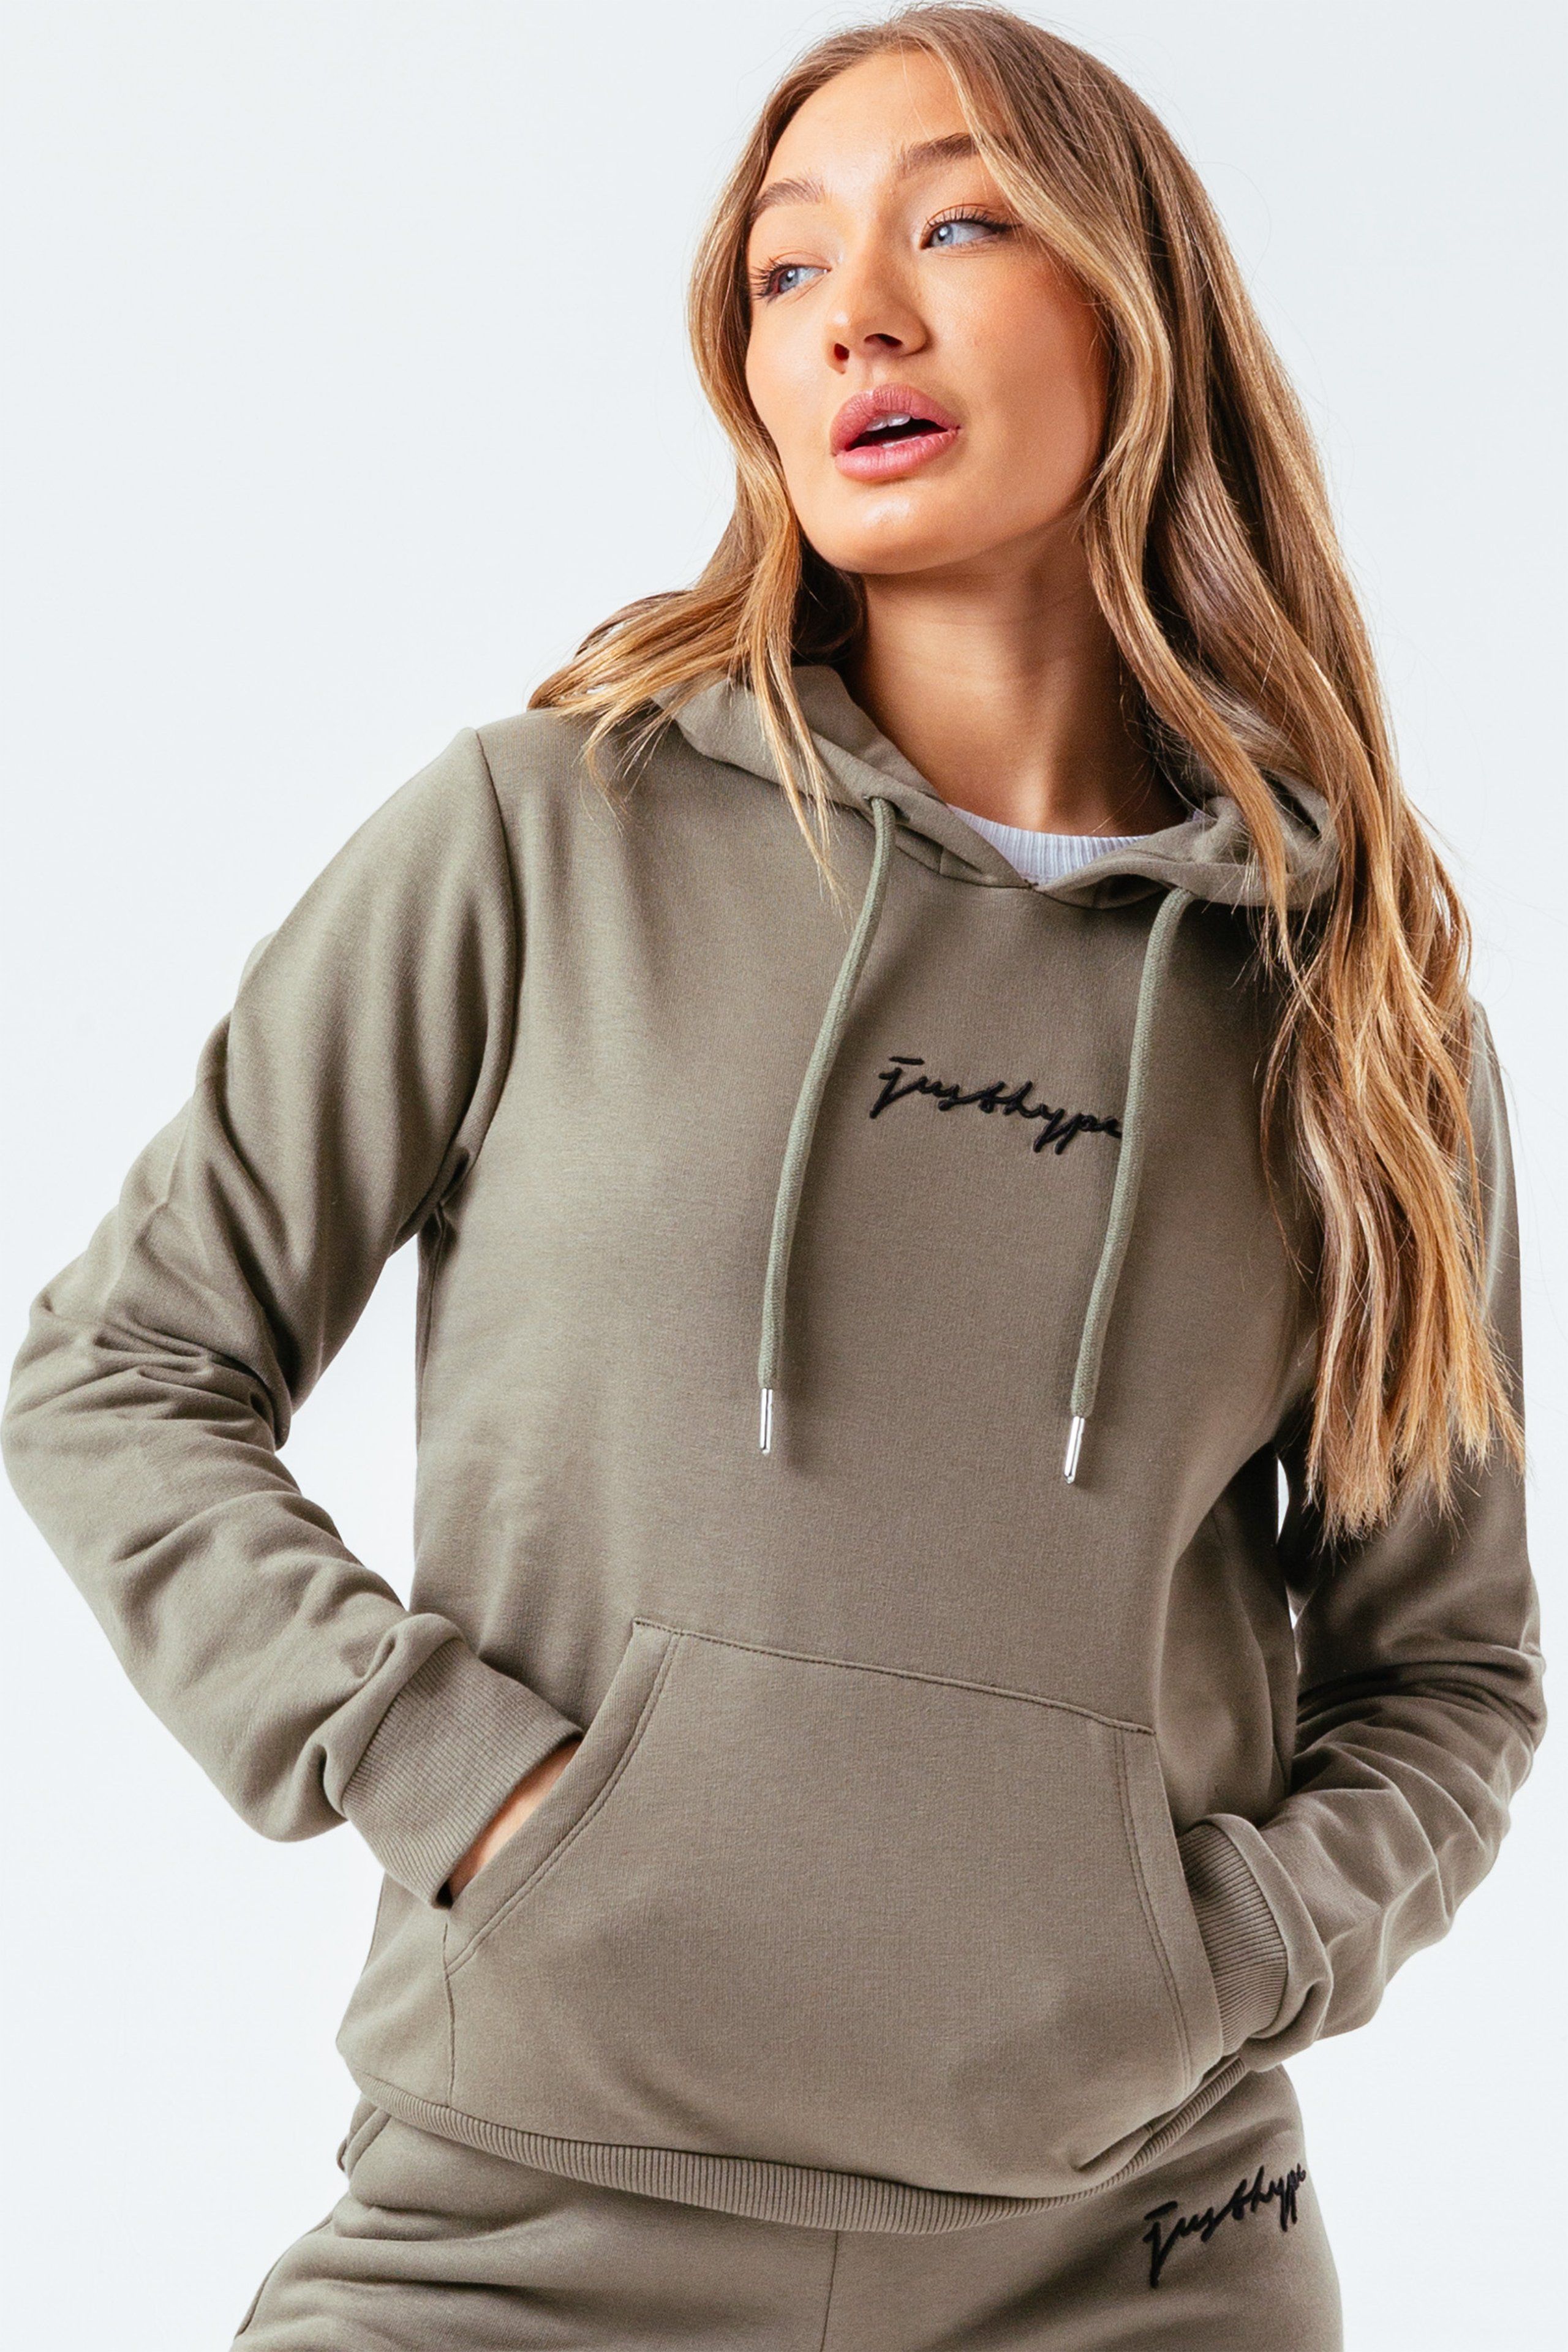 The hoodie staple you need every season. The HYPE. Women's Moss Signature Hoodie. With a fixed hood, fitted cuffs, elasticated waistband and kangaroo pocket. Designed in a moss green 80% cotton and 20% polyester fabric base for the ultimate comfort and breathable space. Wear with the matching joggers to complete your next loungewear look. Machine Washable